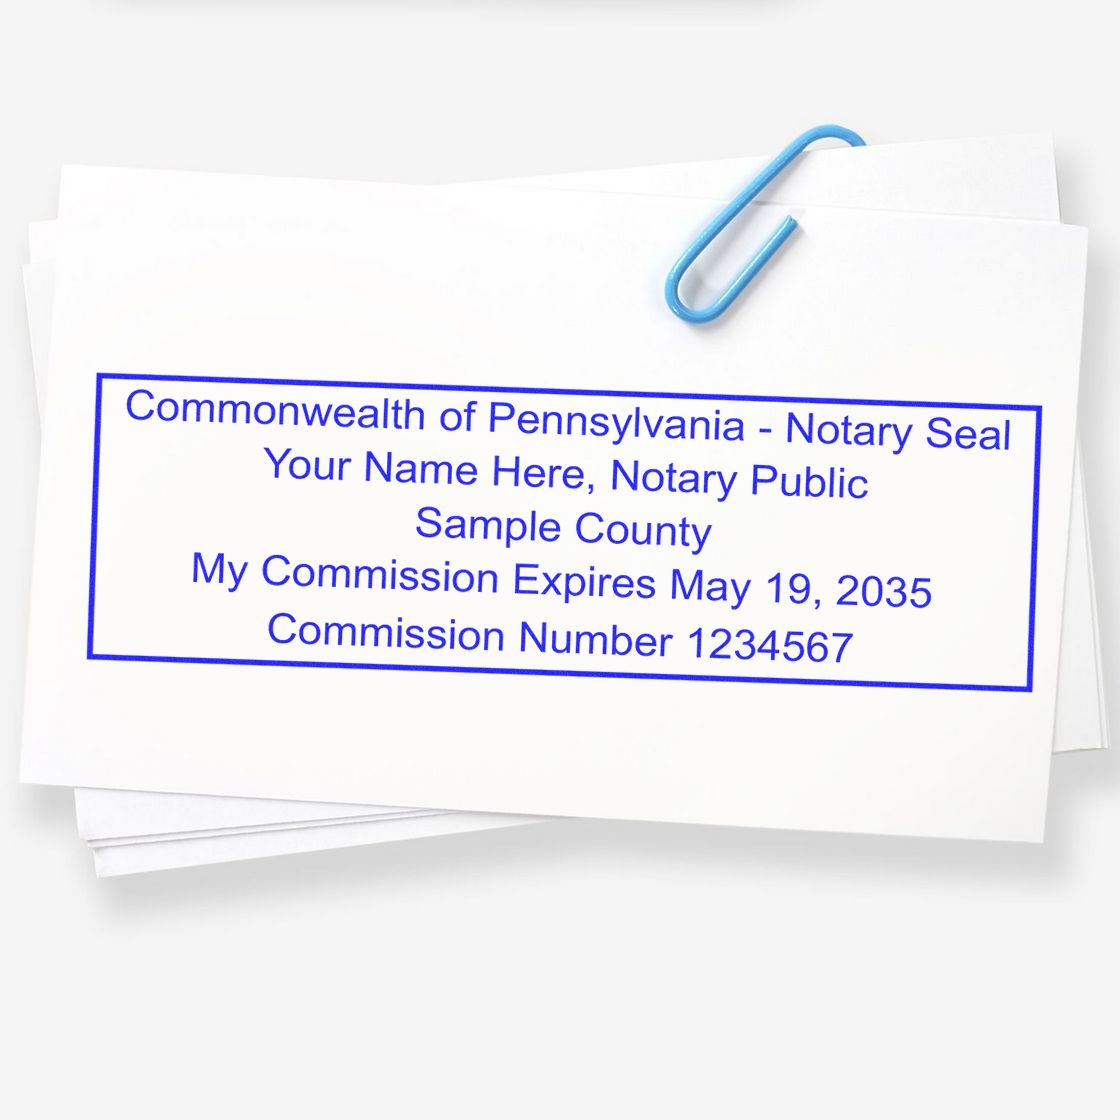 An alternative view of the PSI Pennsylvania Notary Stamp stamped on a sheet of paper showing the image in use